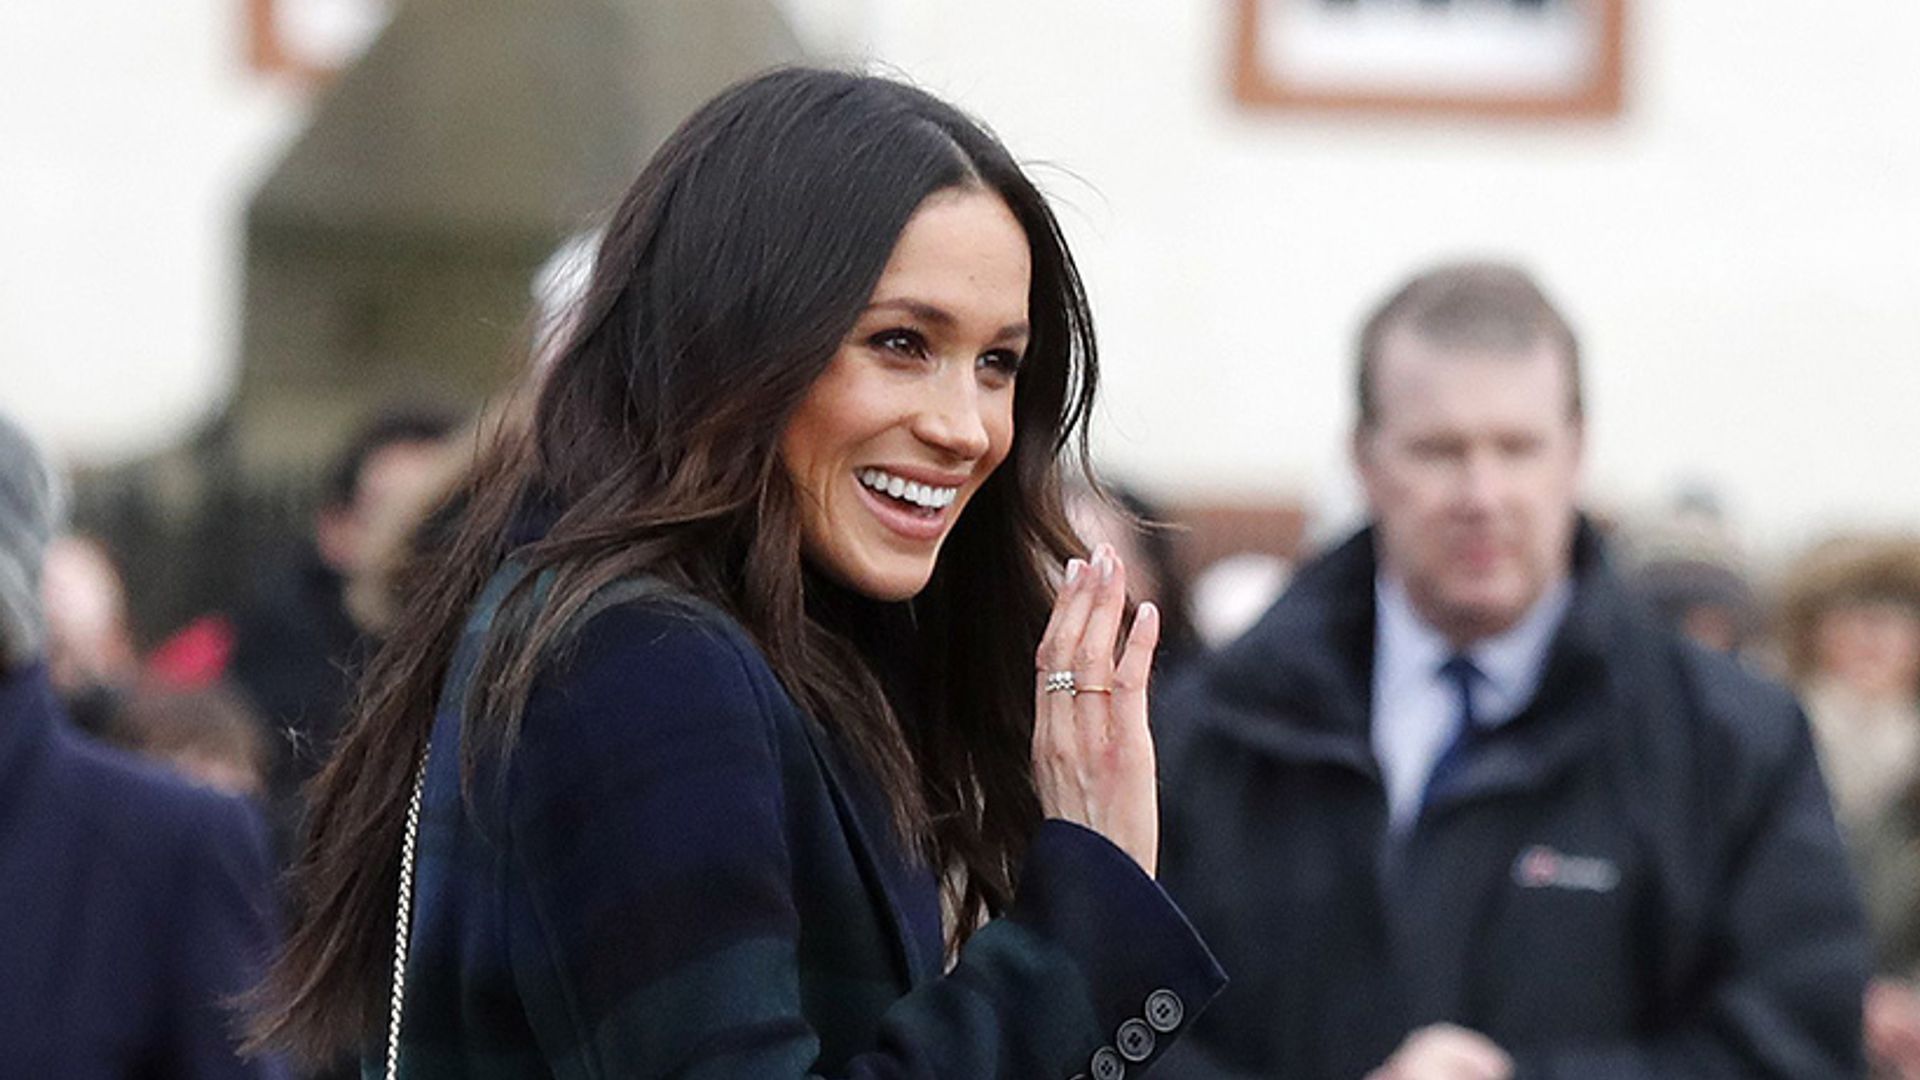 Meghan Markle in Burberry Coat, Strathberry Bag in Scotland: Shop